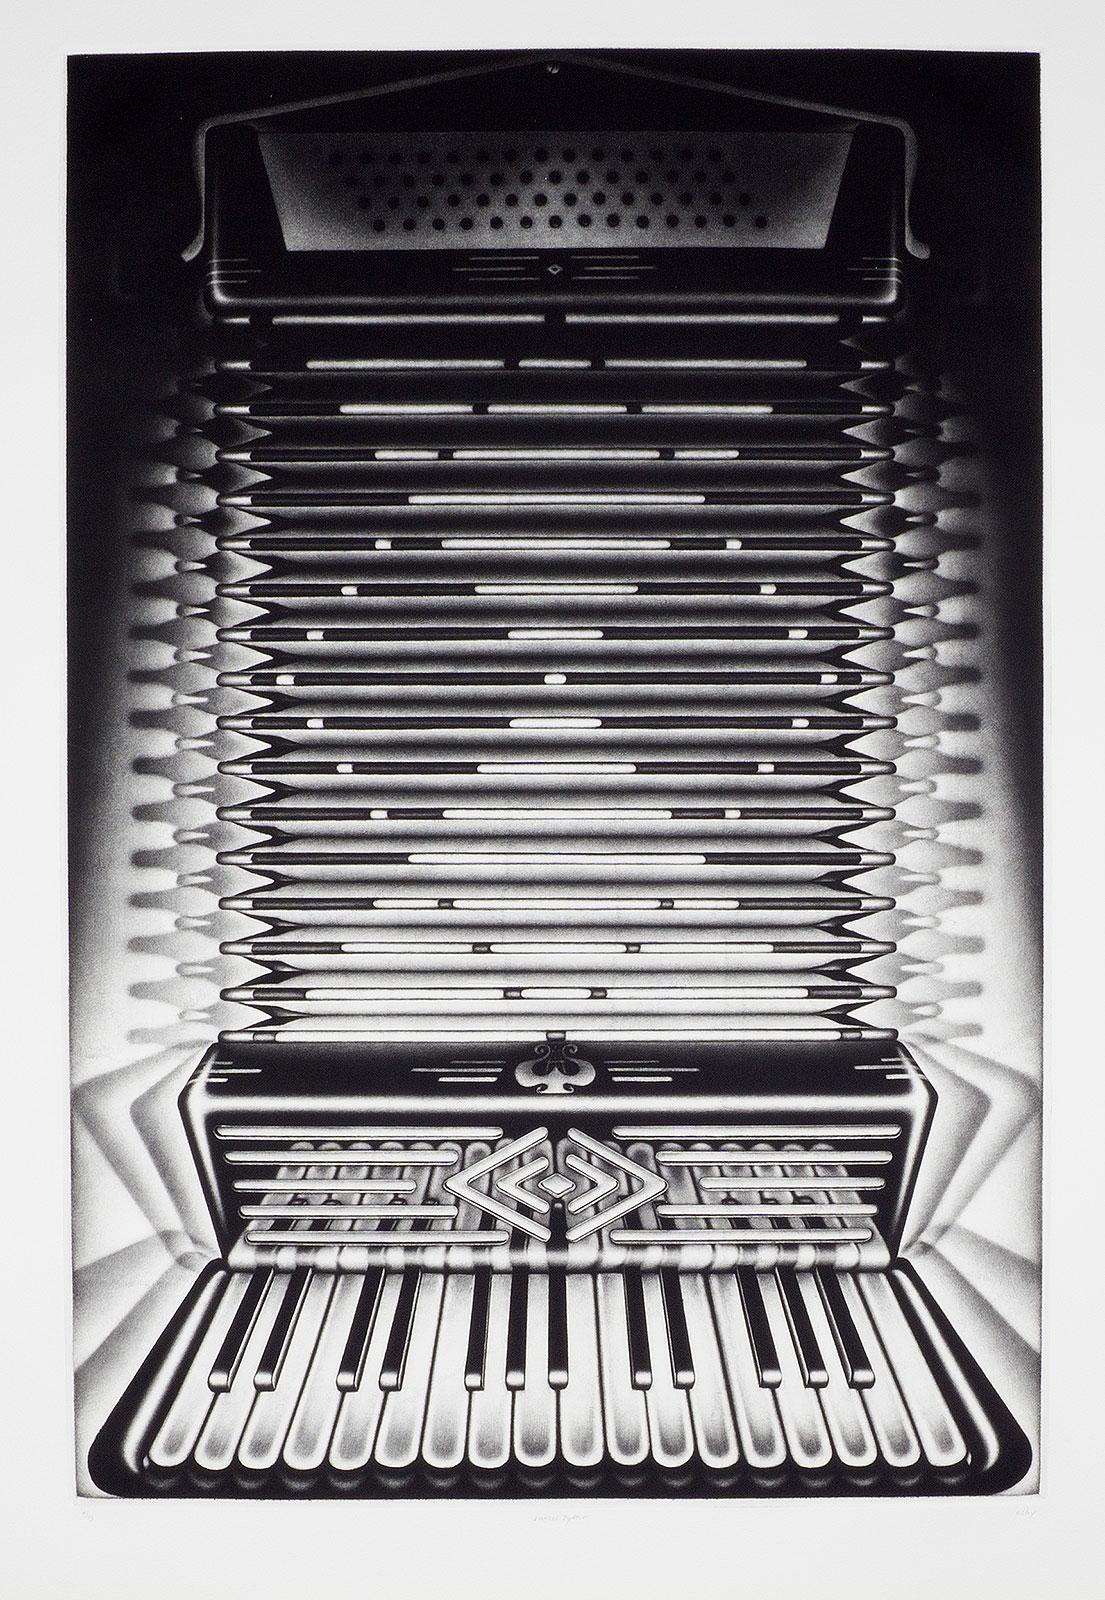 Vertical Zydeco (Making Cajun music with rhythmic patterns of light and shadow) - Print by Carol Wax